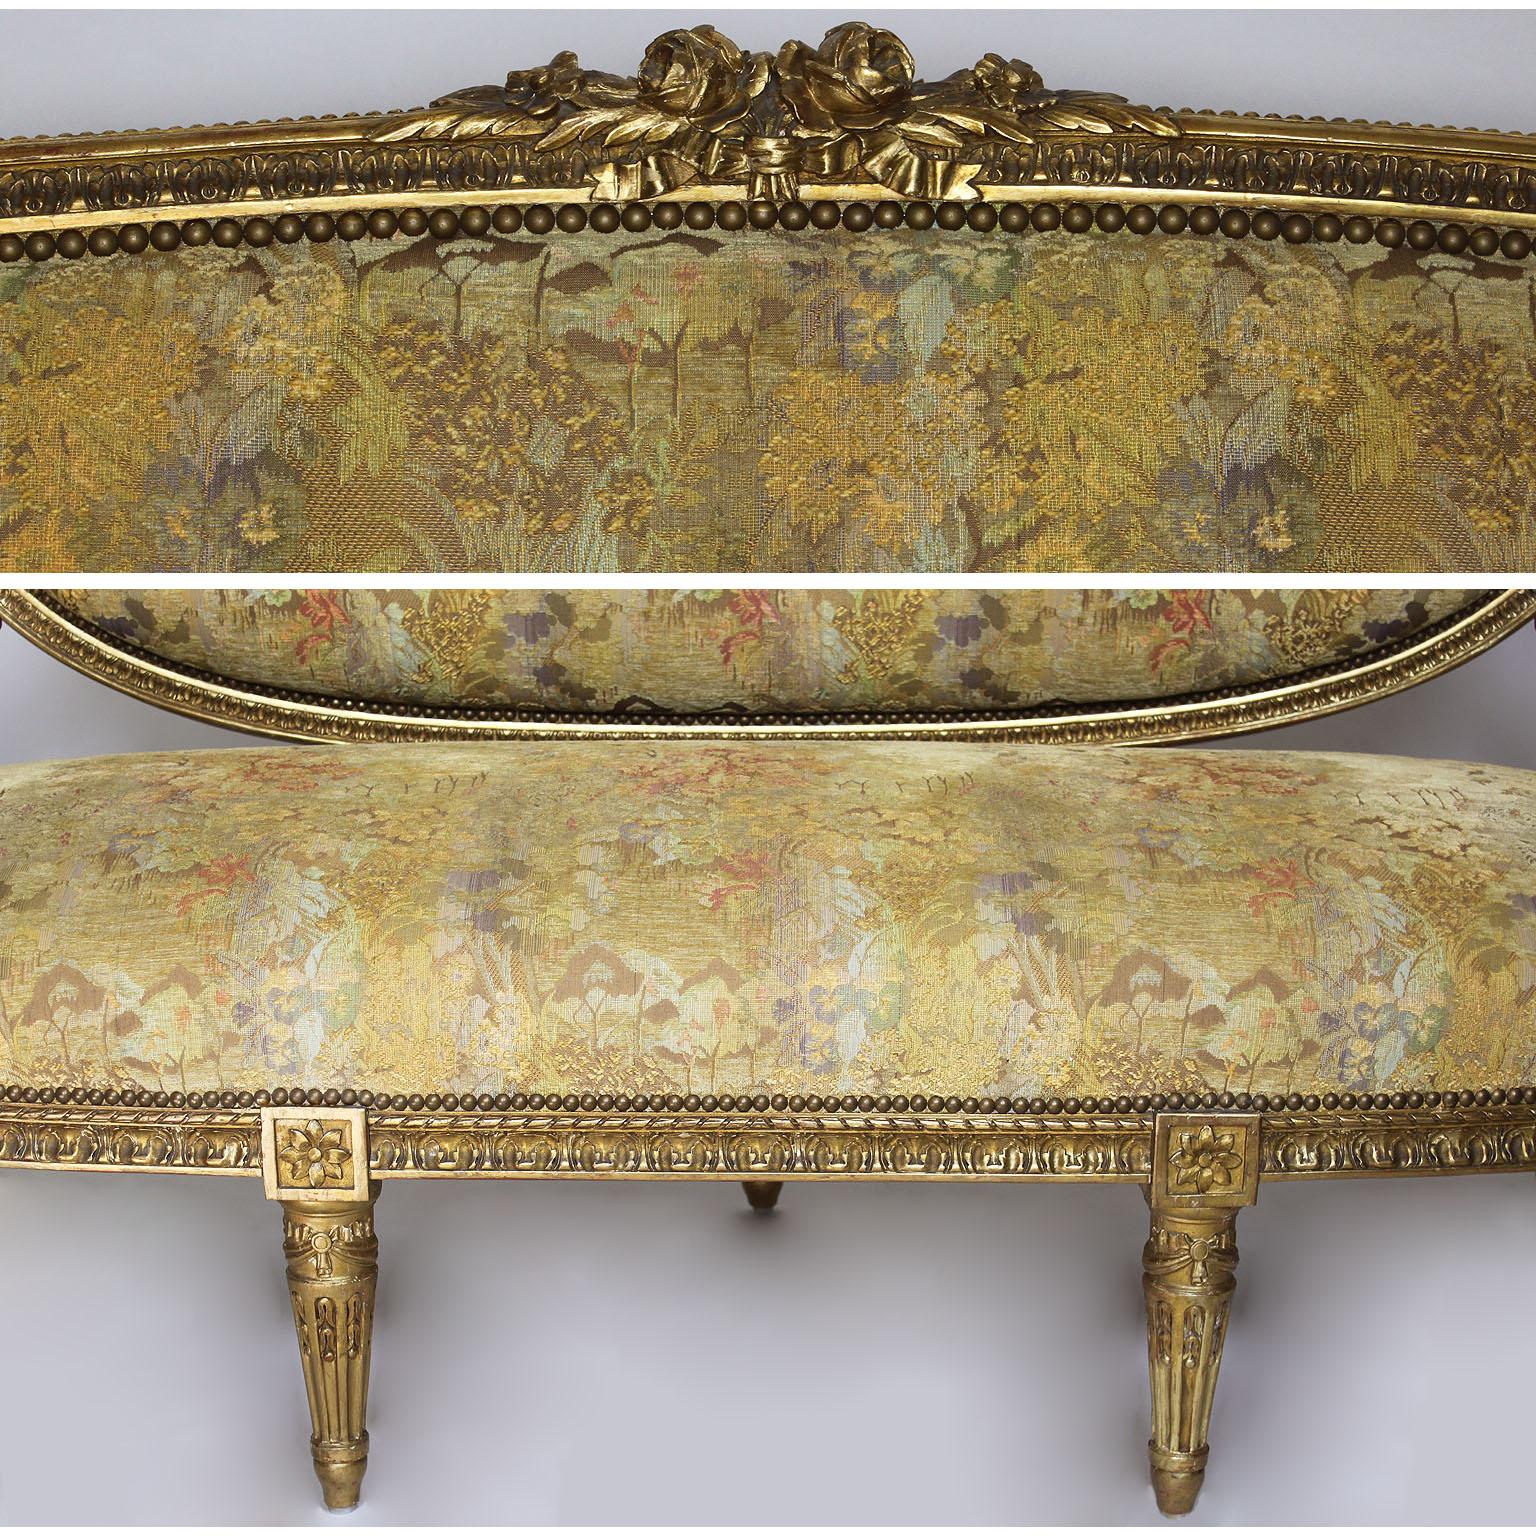 Fine French 19th Century Louis XVI Style Giltwood Carved Five-Piece Salon Suite For Sale 12